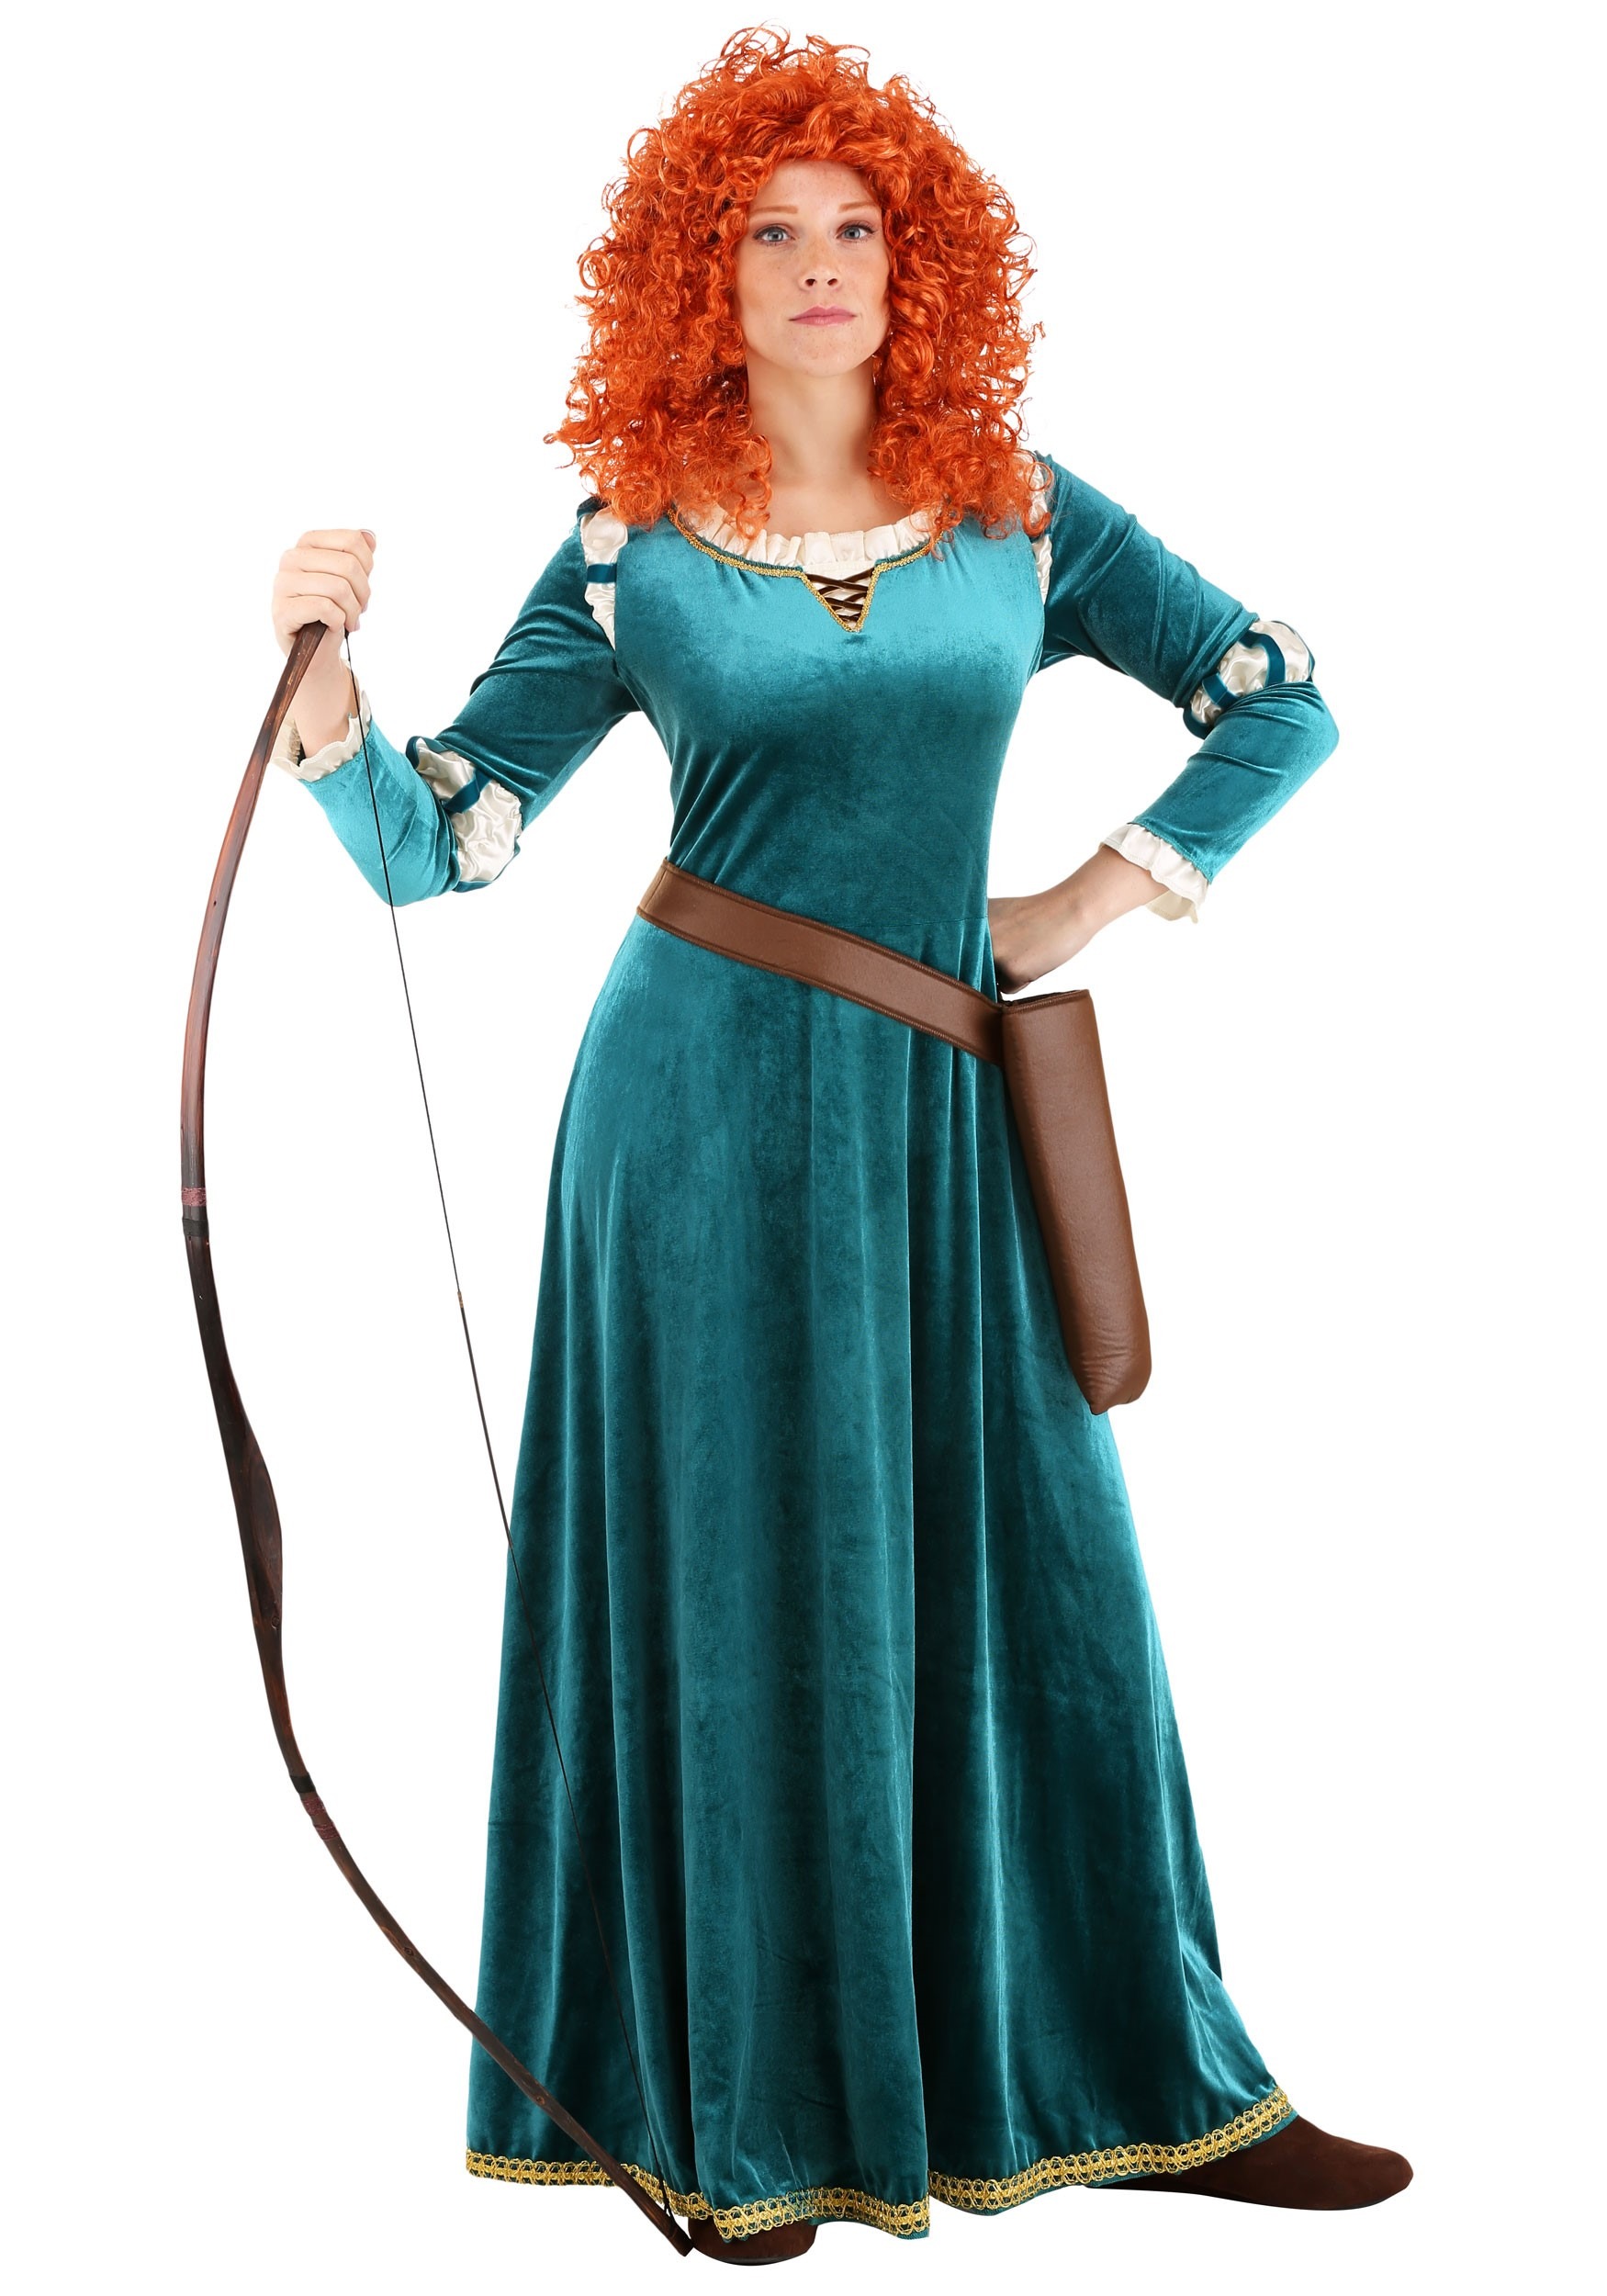 merida brave costume for adults